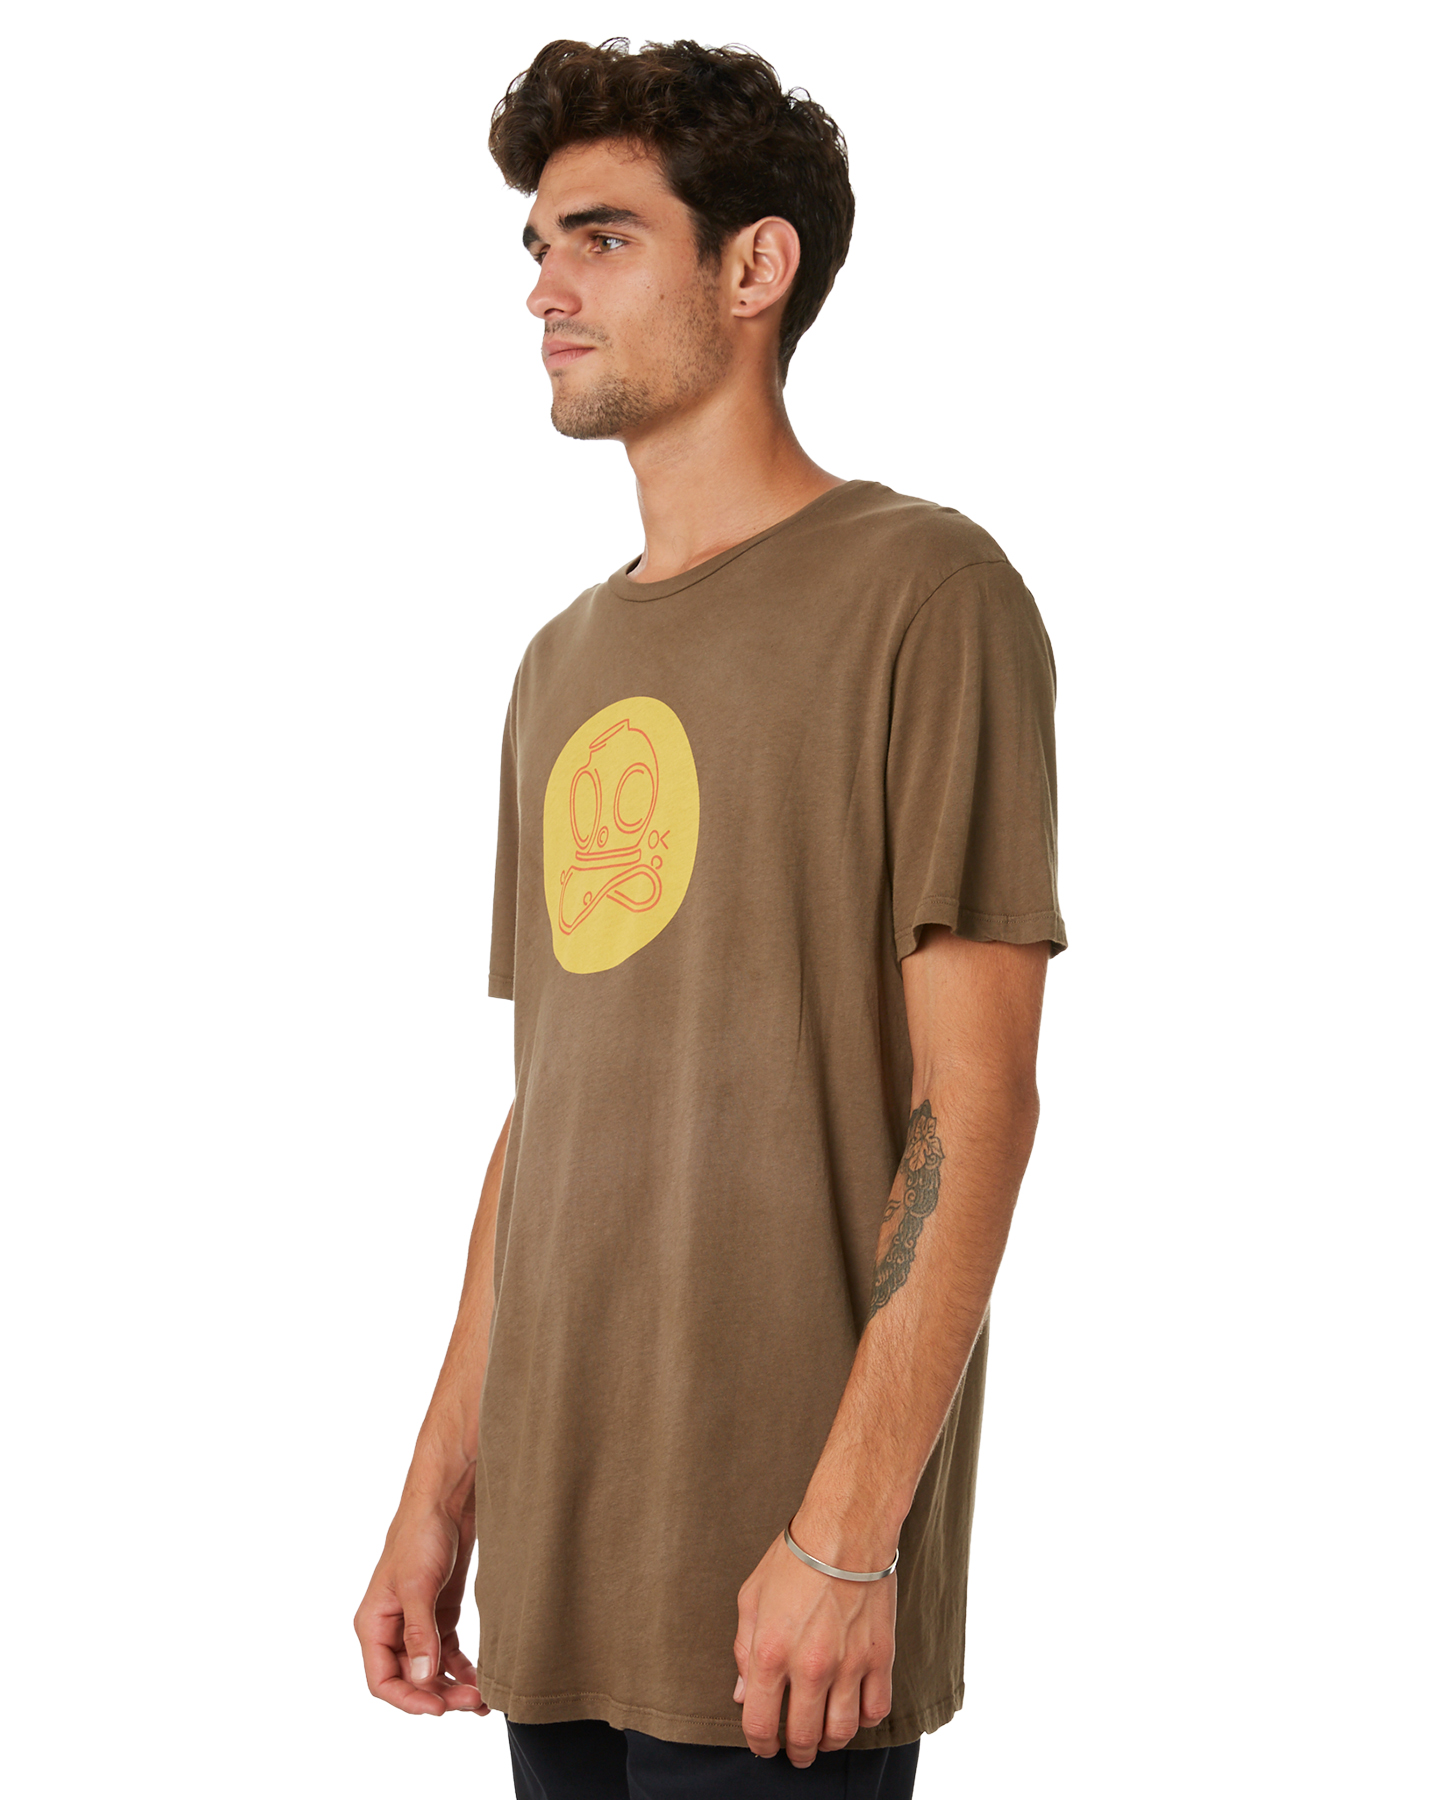 Outerknown Into The Outerknown Mens Tee - Fatigue | SurfStitch